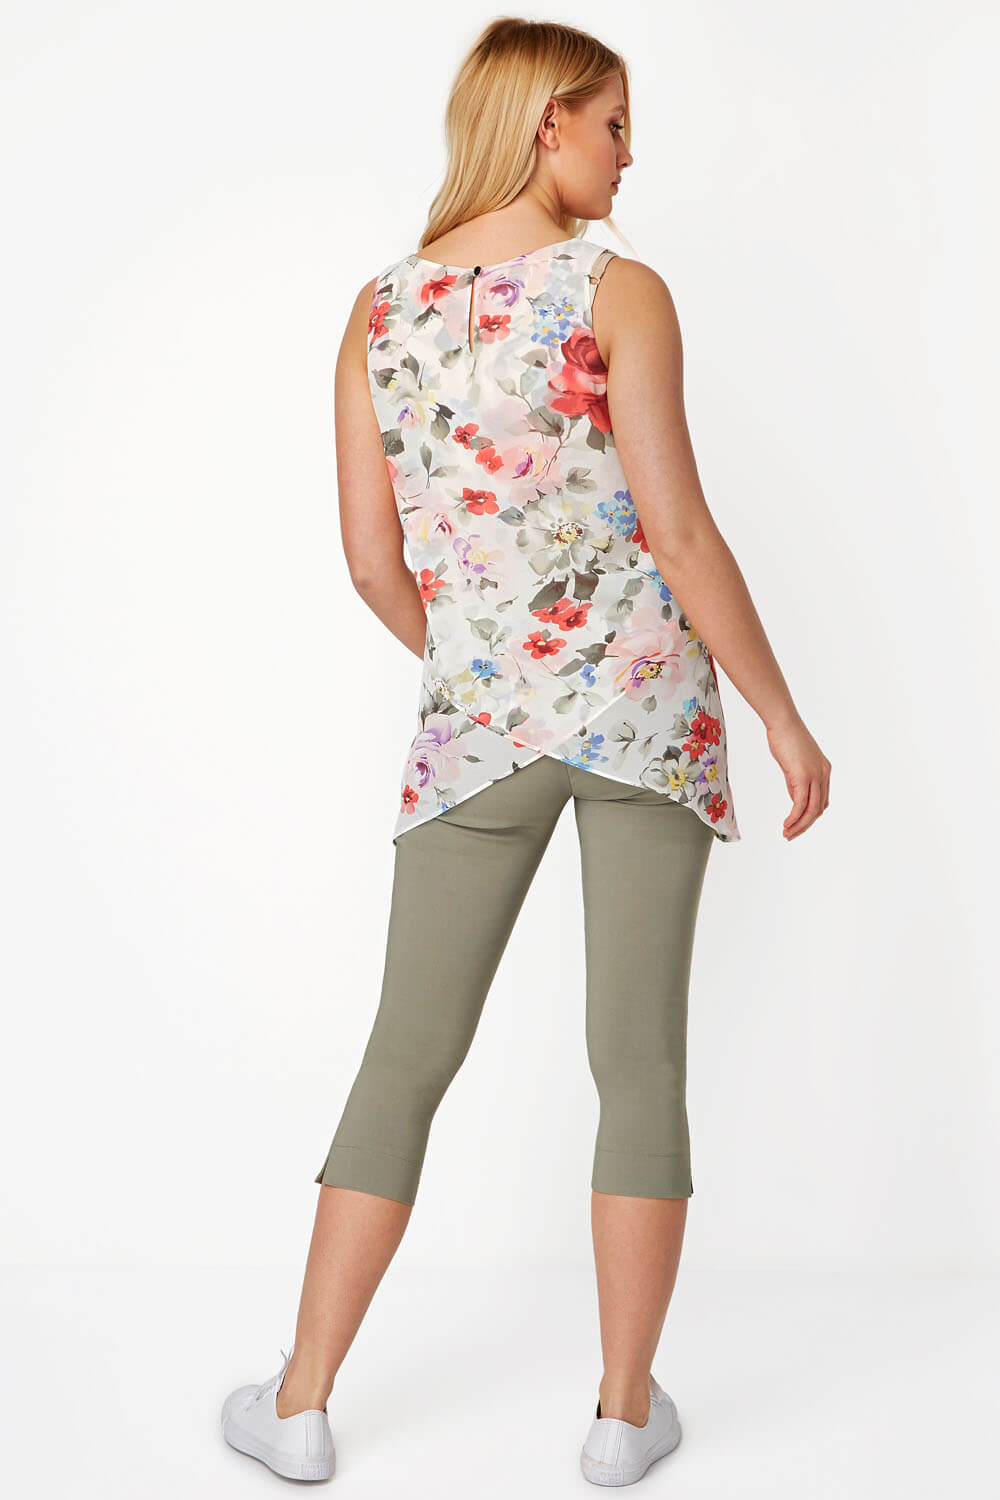 PINK Floral Print Asymmetric Top , Image 3 of 8